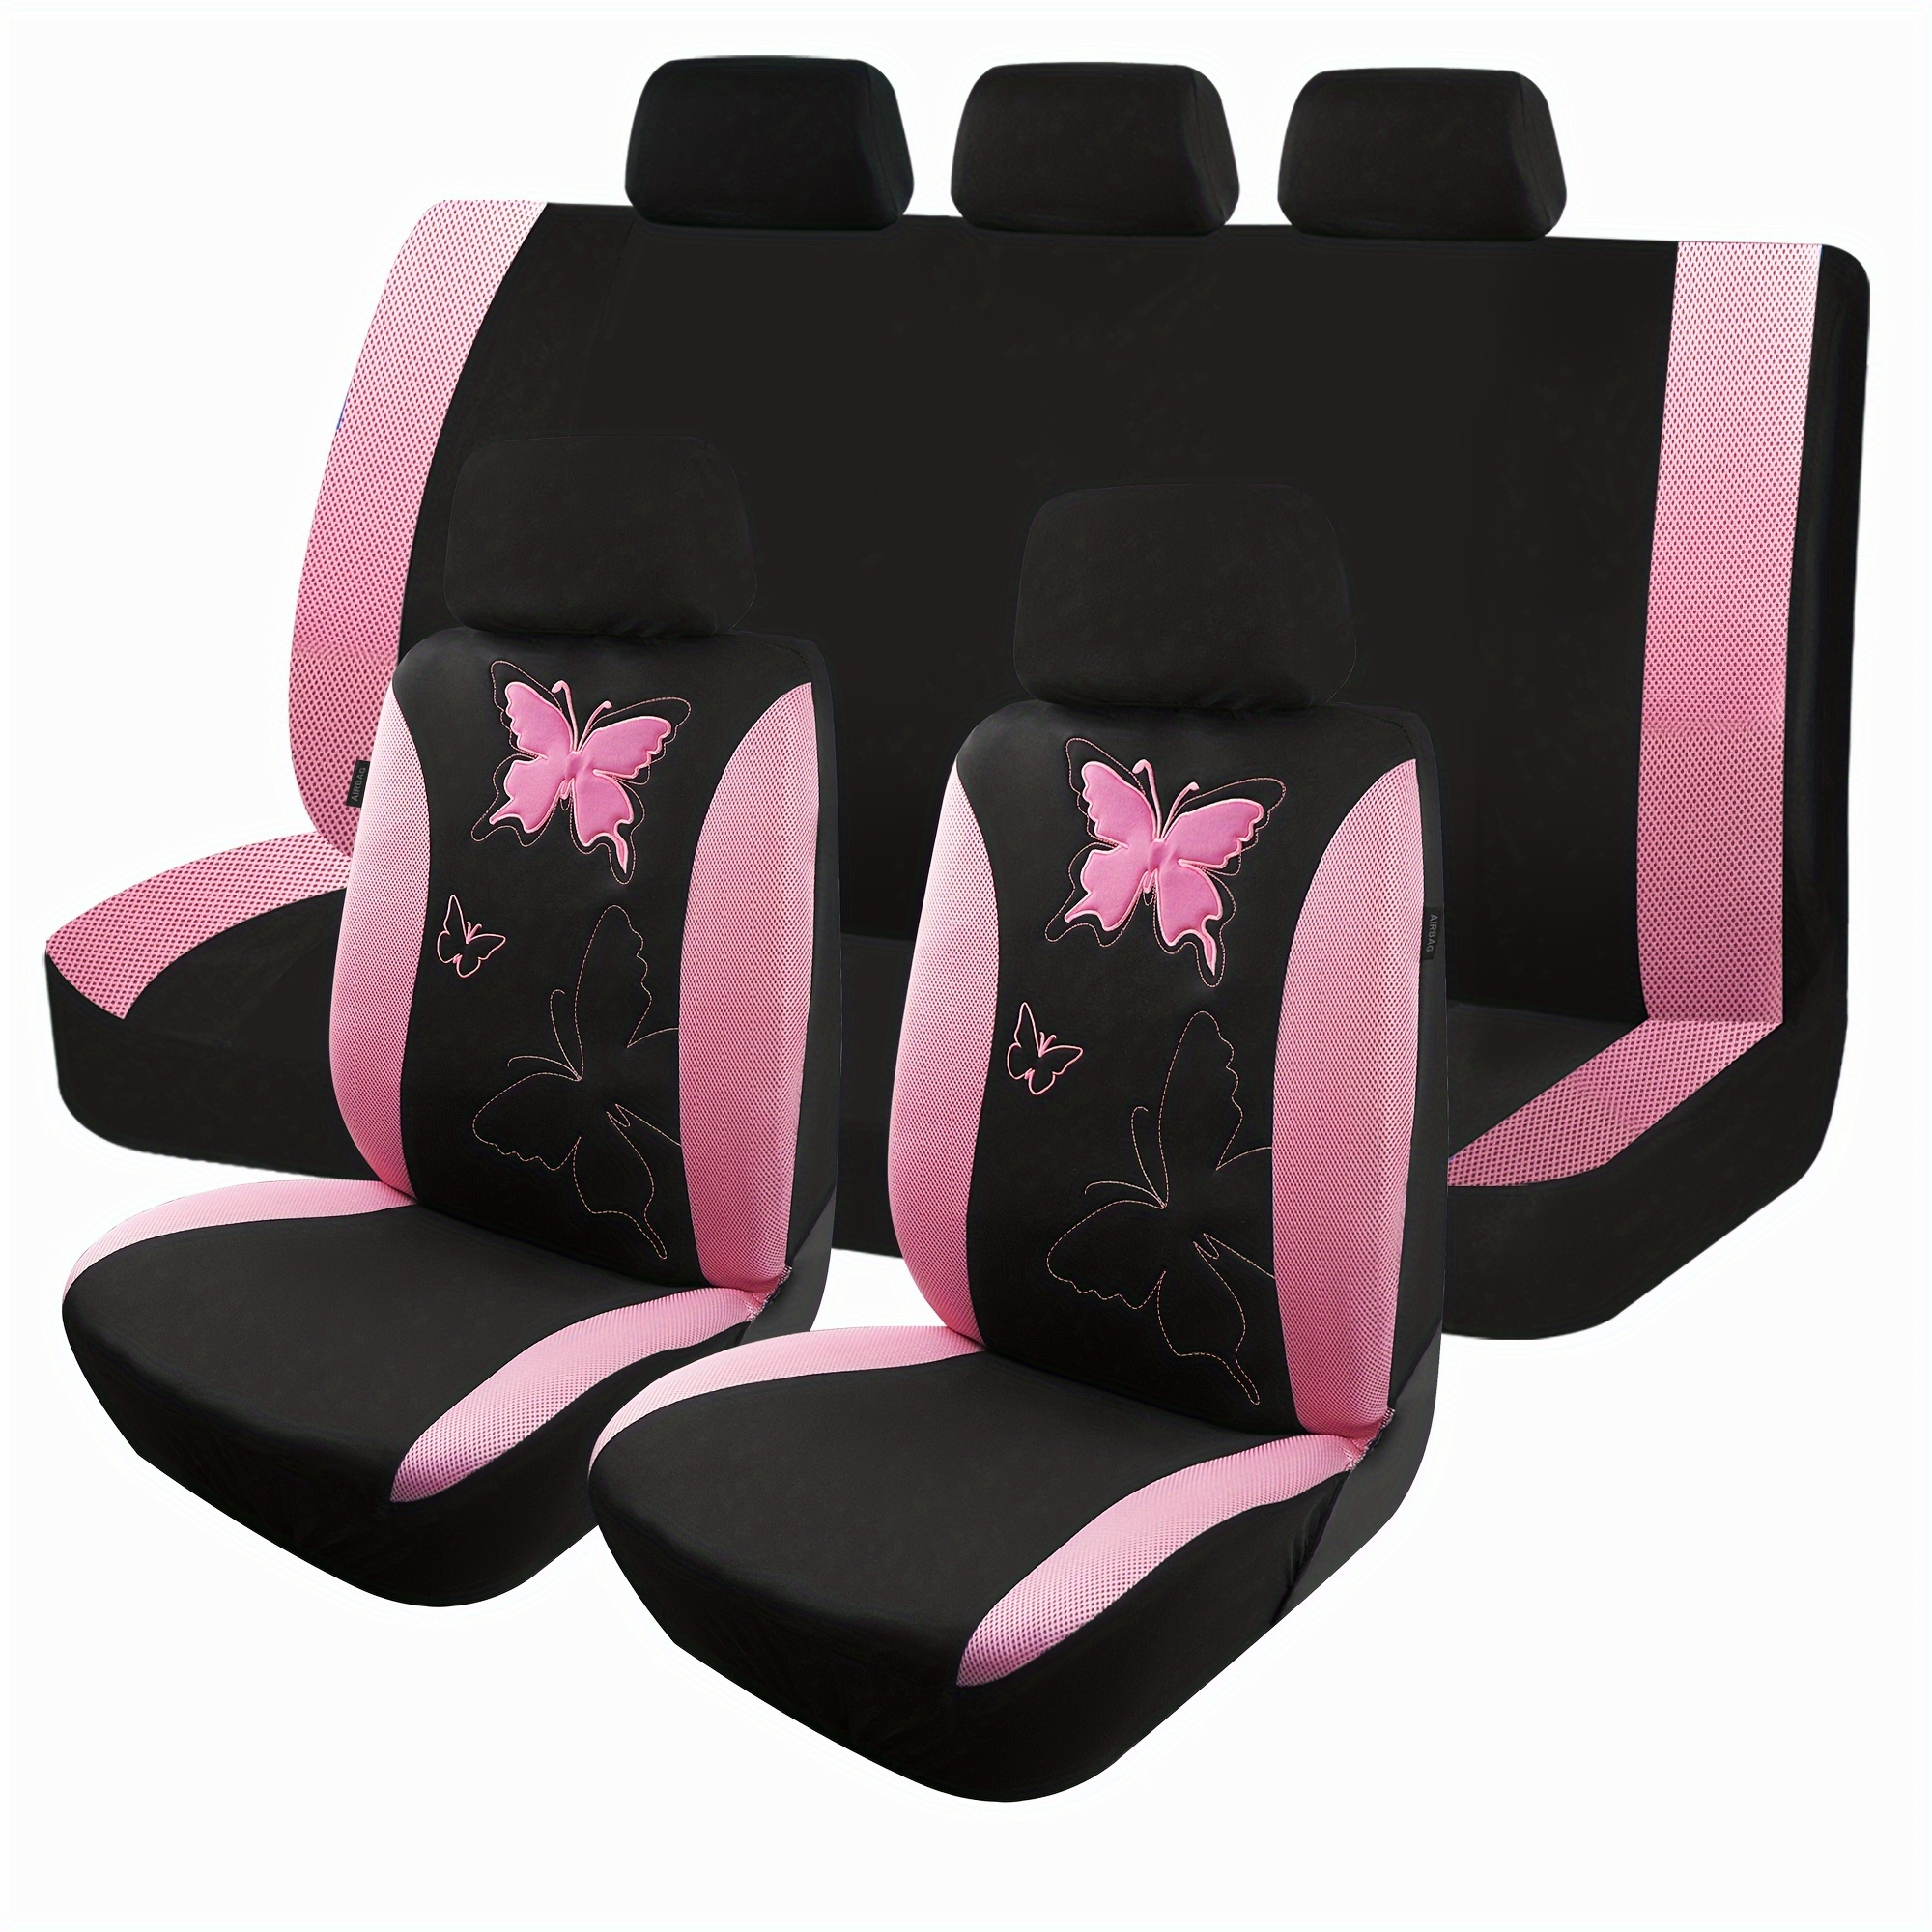 Suhoaziia Daisy Car Seat Cover 7 PCS Universal Fit Car Sedans  Truck,Comfortable Mushroom High Back Front Back Seat Cover Auto  Accessiores,Anti-Slip Butterfly Steering Cover and Seat Belt Cover 